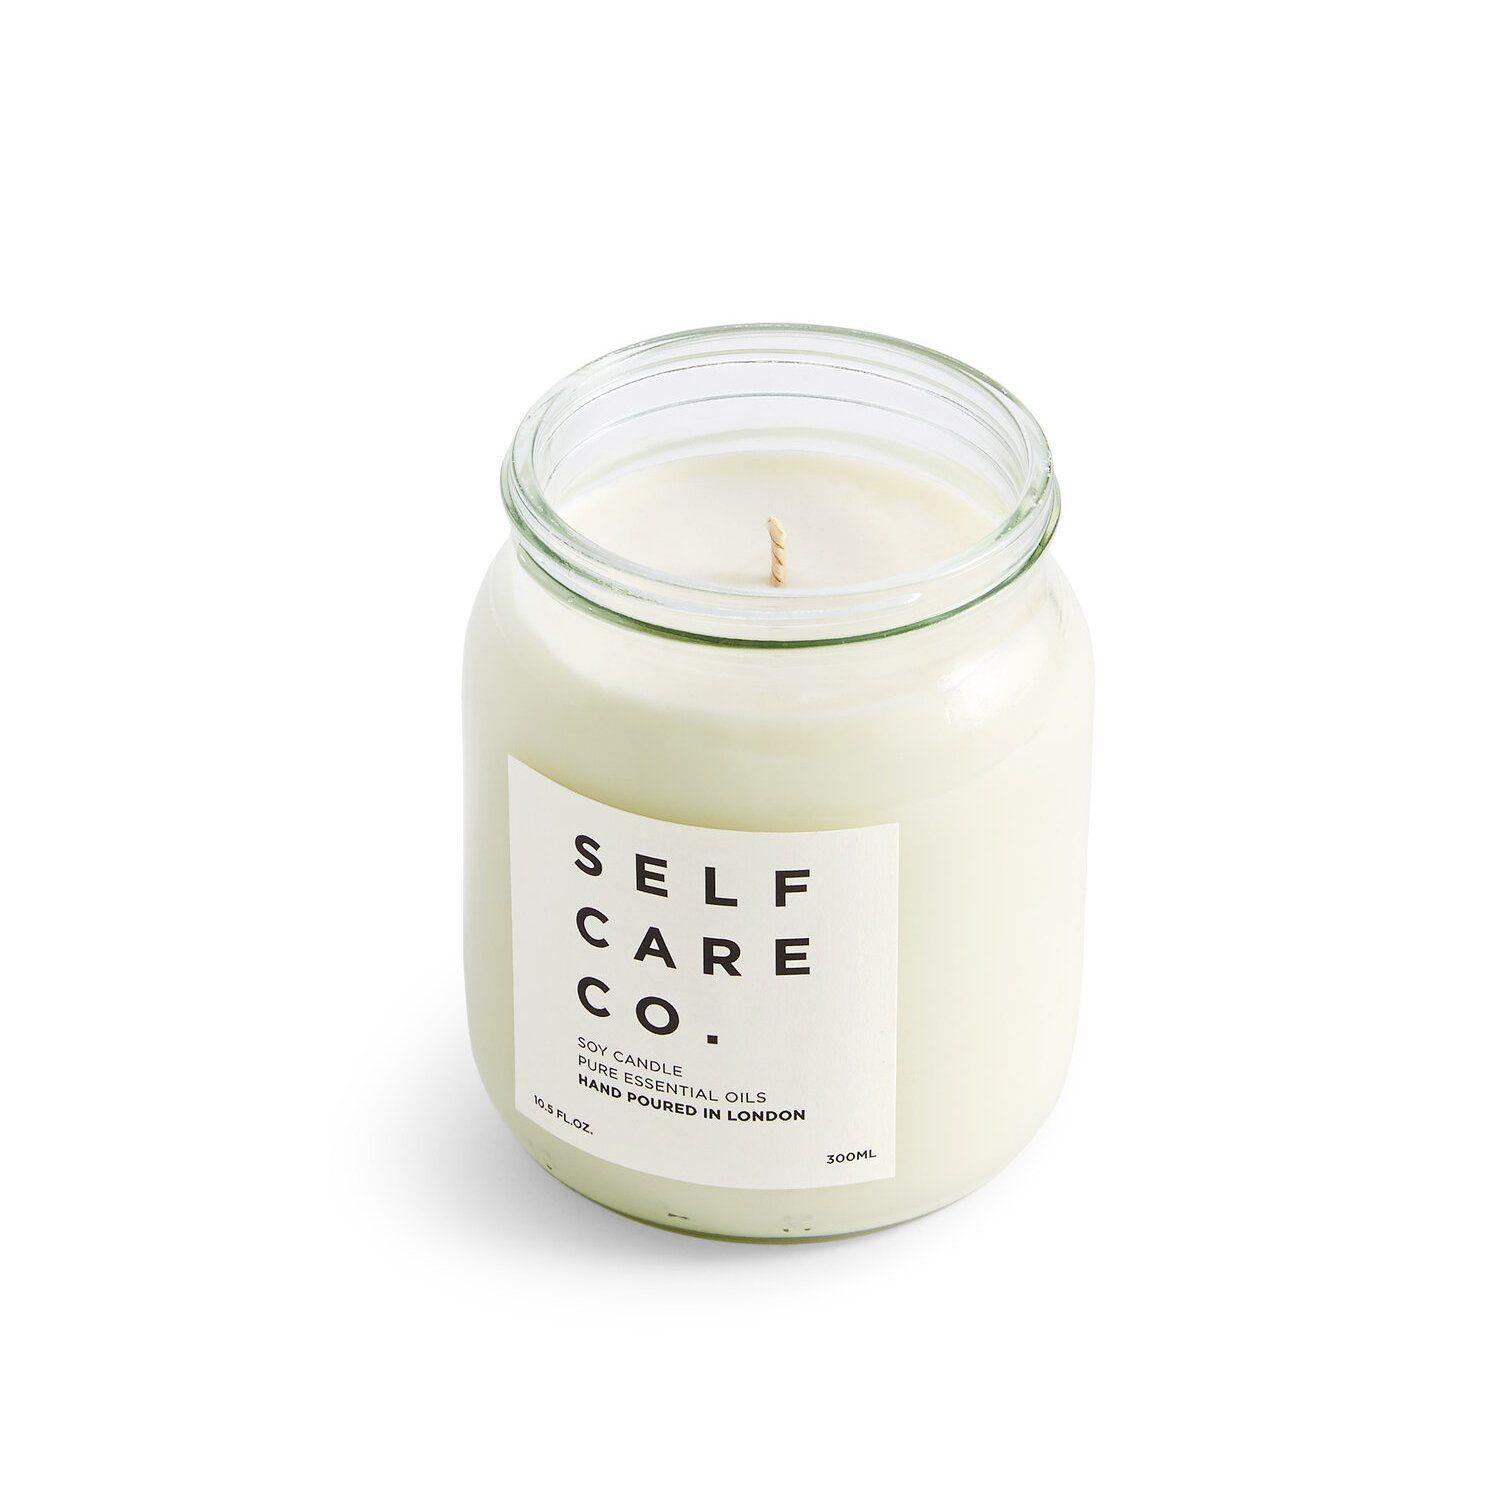 May Chang + Rosemary Aromatherapy Candle Kerzen Self Care Co. 300ml - Genuine Selection